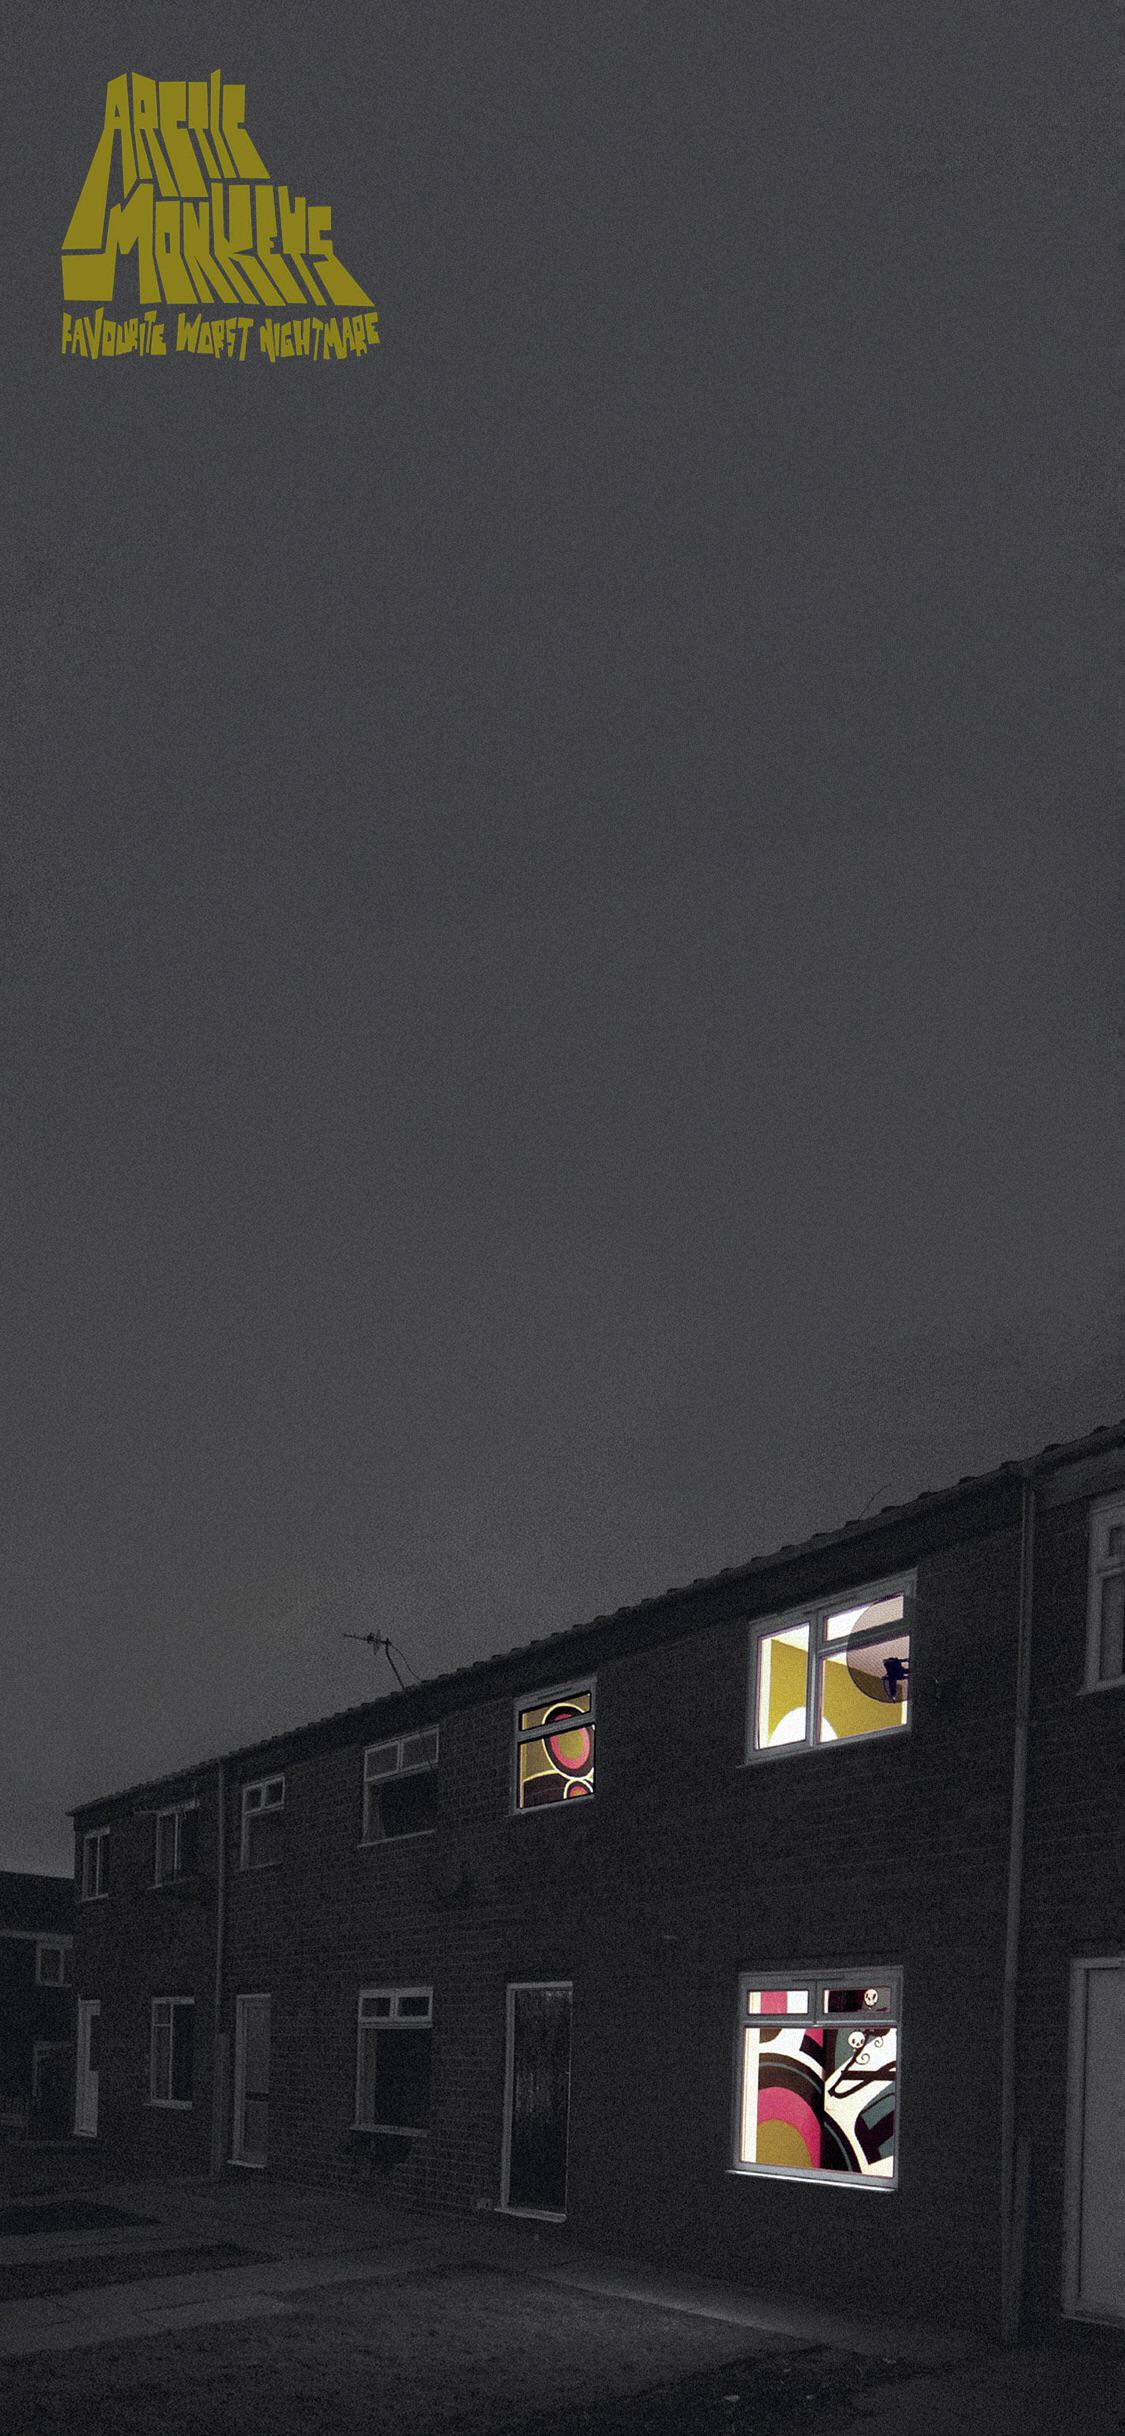 Couldn't find any high quality Favourite Worst Nightmare phone wallpaper so I made my own, feel free to use them!